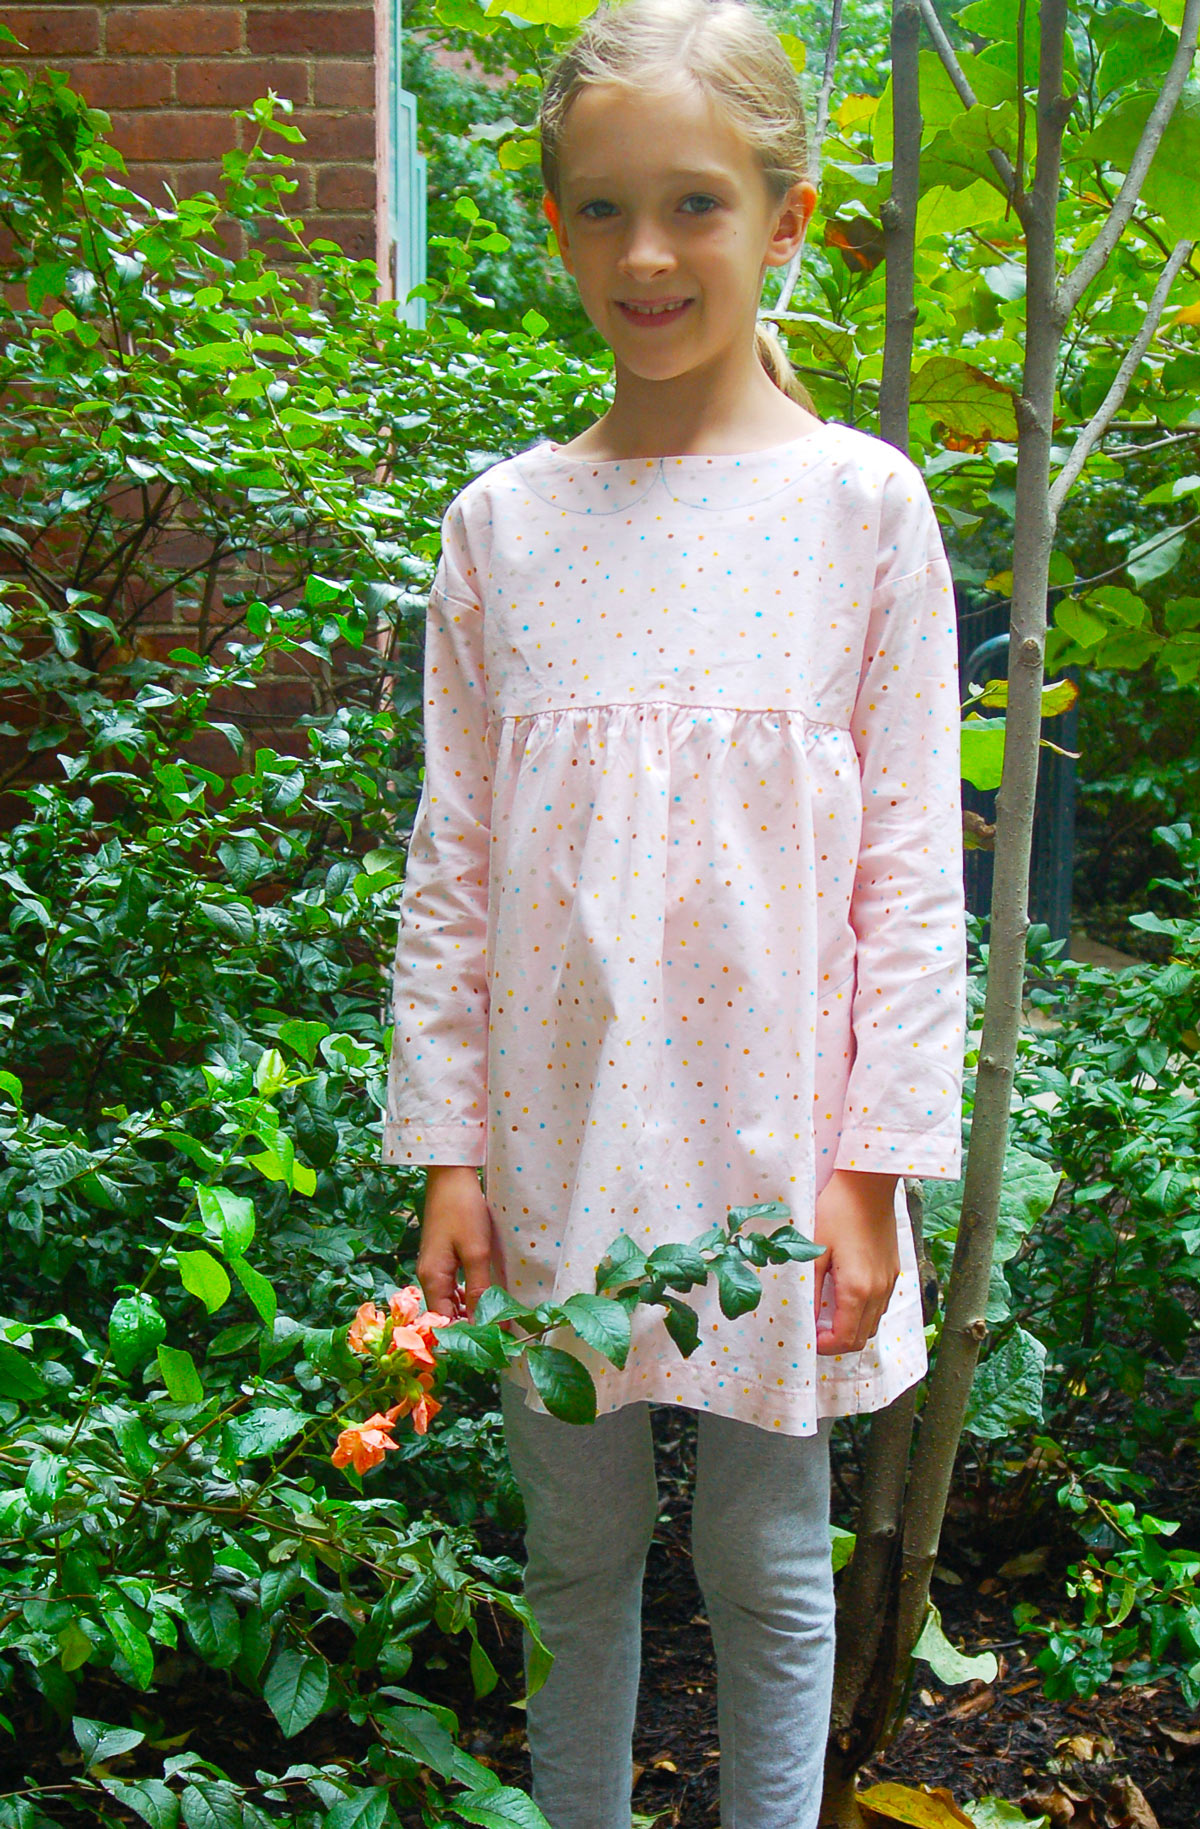 Introducing the Playtime Dress, Tunic + Leggings Sewing Pattern